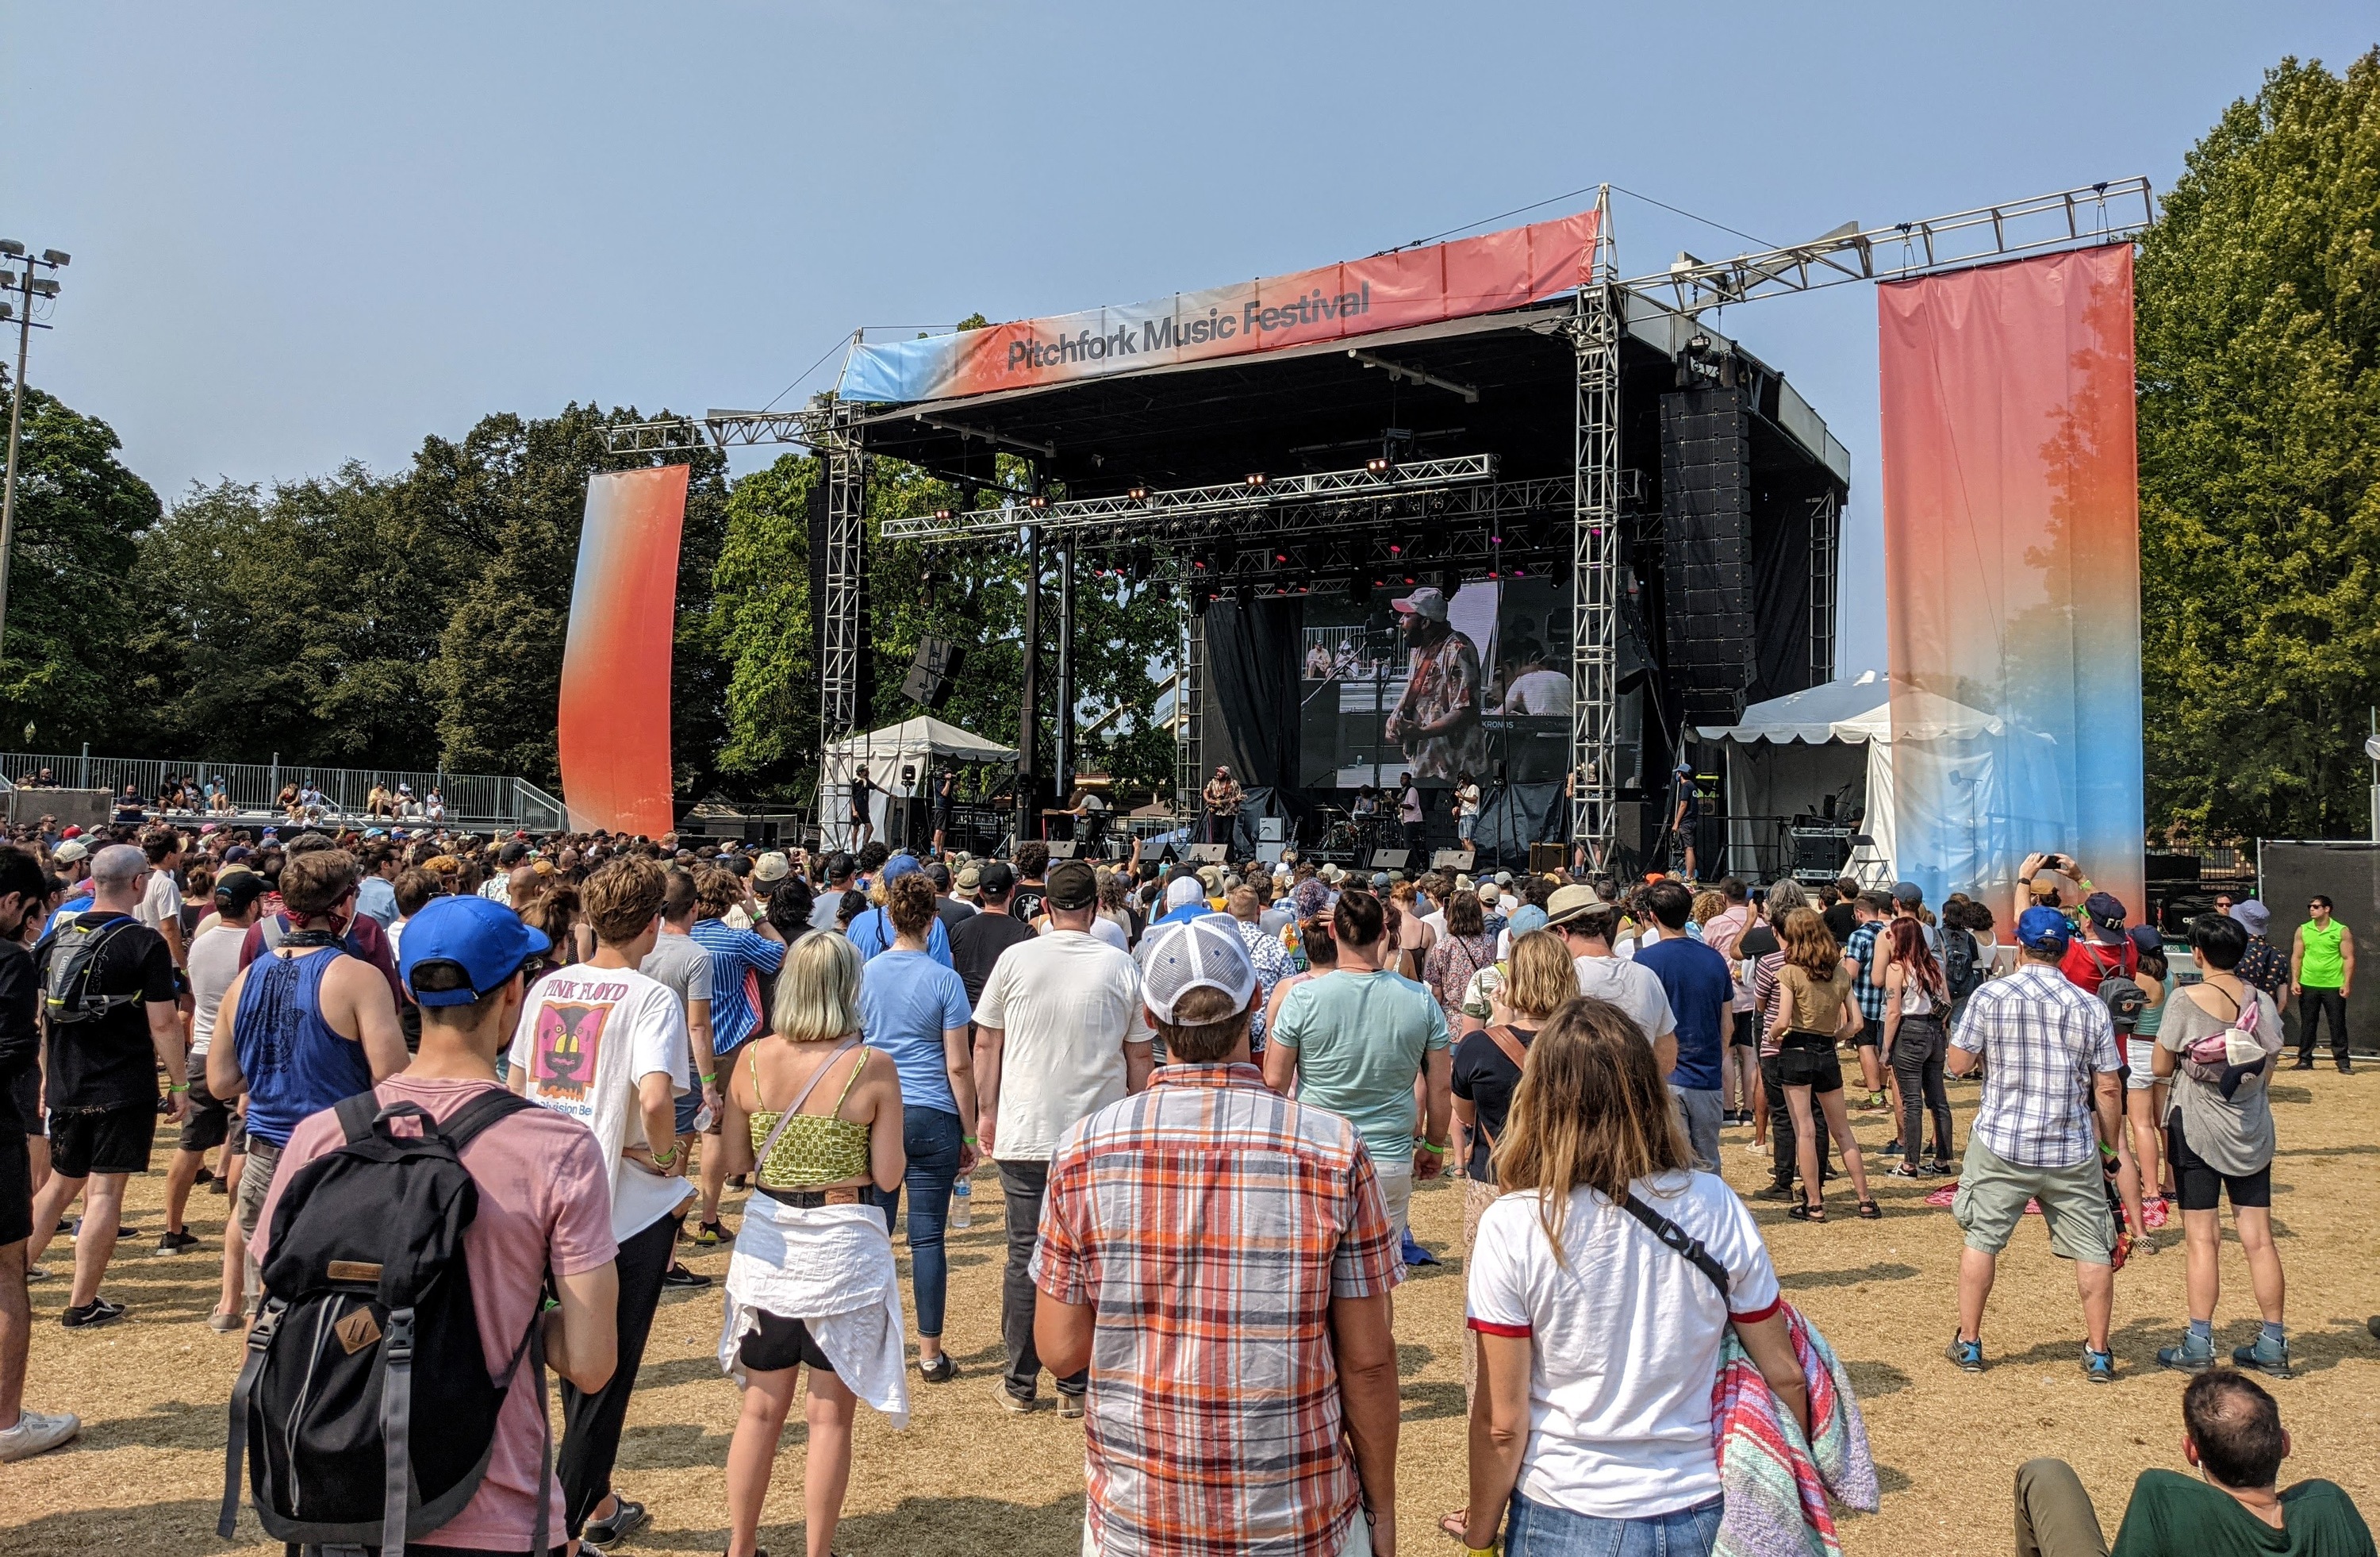 18-facts-about-pitchfork-music-festival